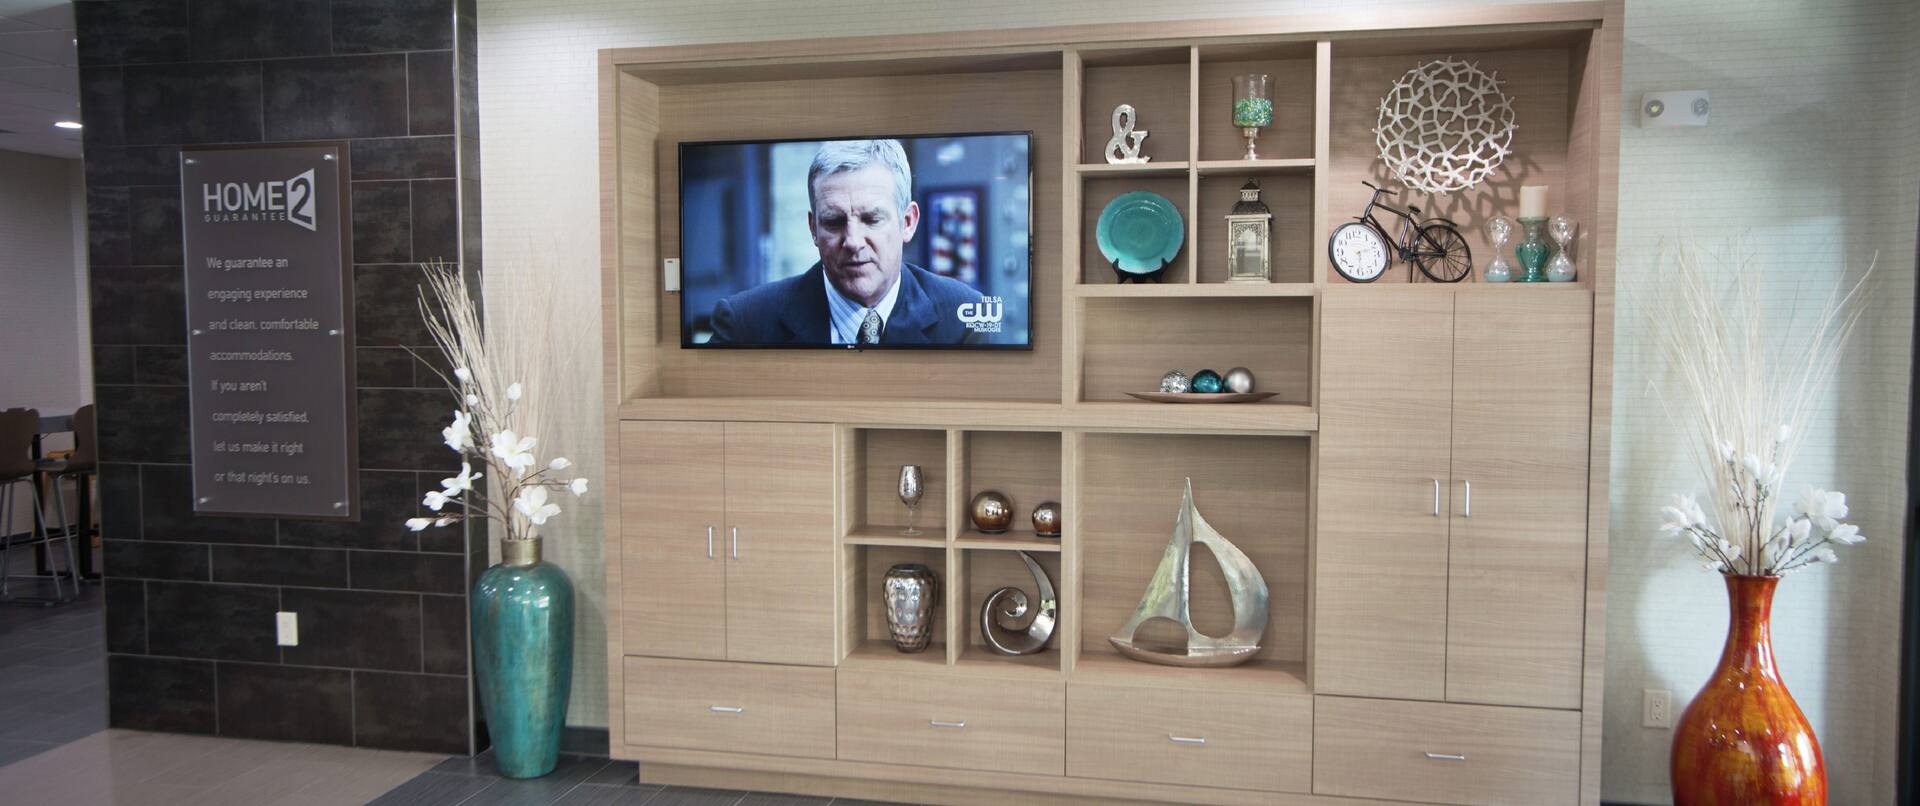 Lobby With Signage and TV in Decorated Media Cabinet